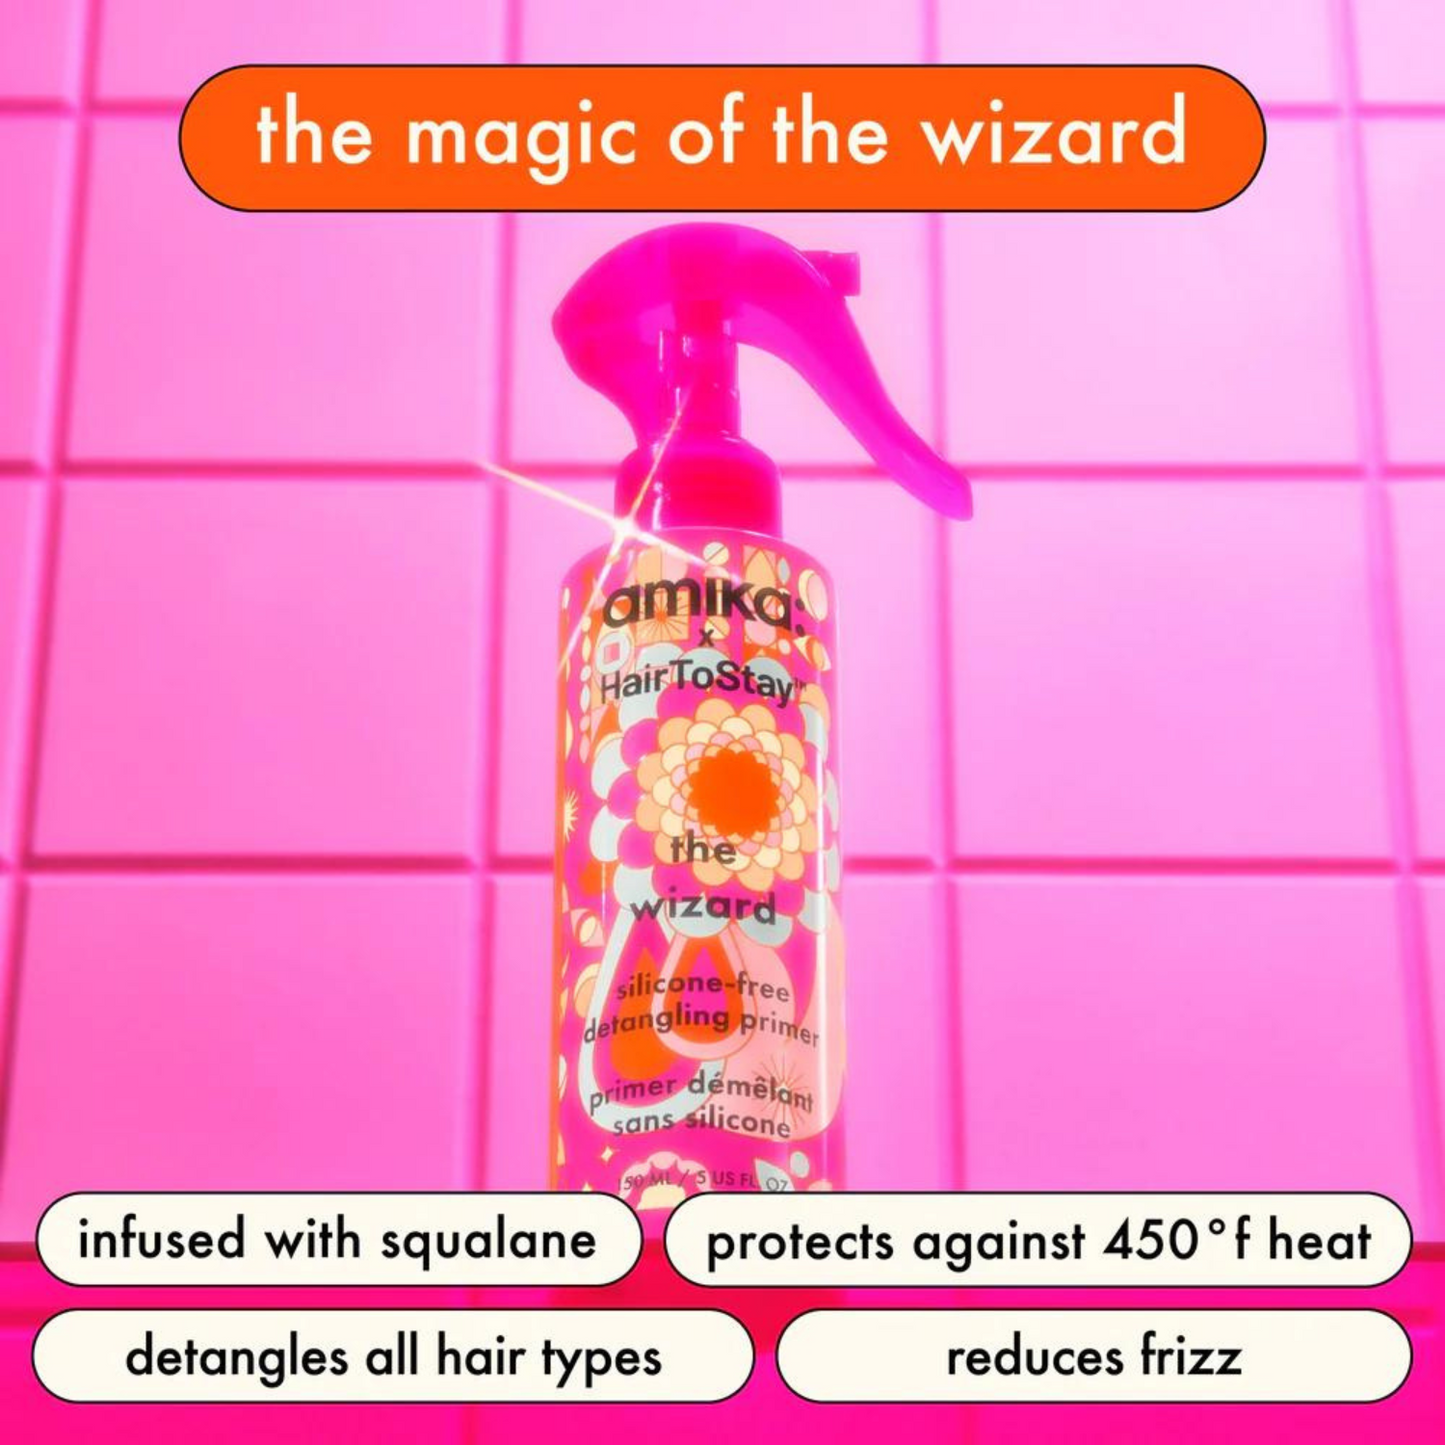 amika - Limited Edition HairToStay The Wizard Silicone-free Detangling Primer